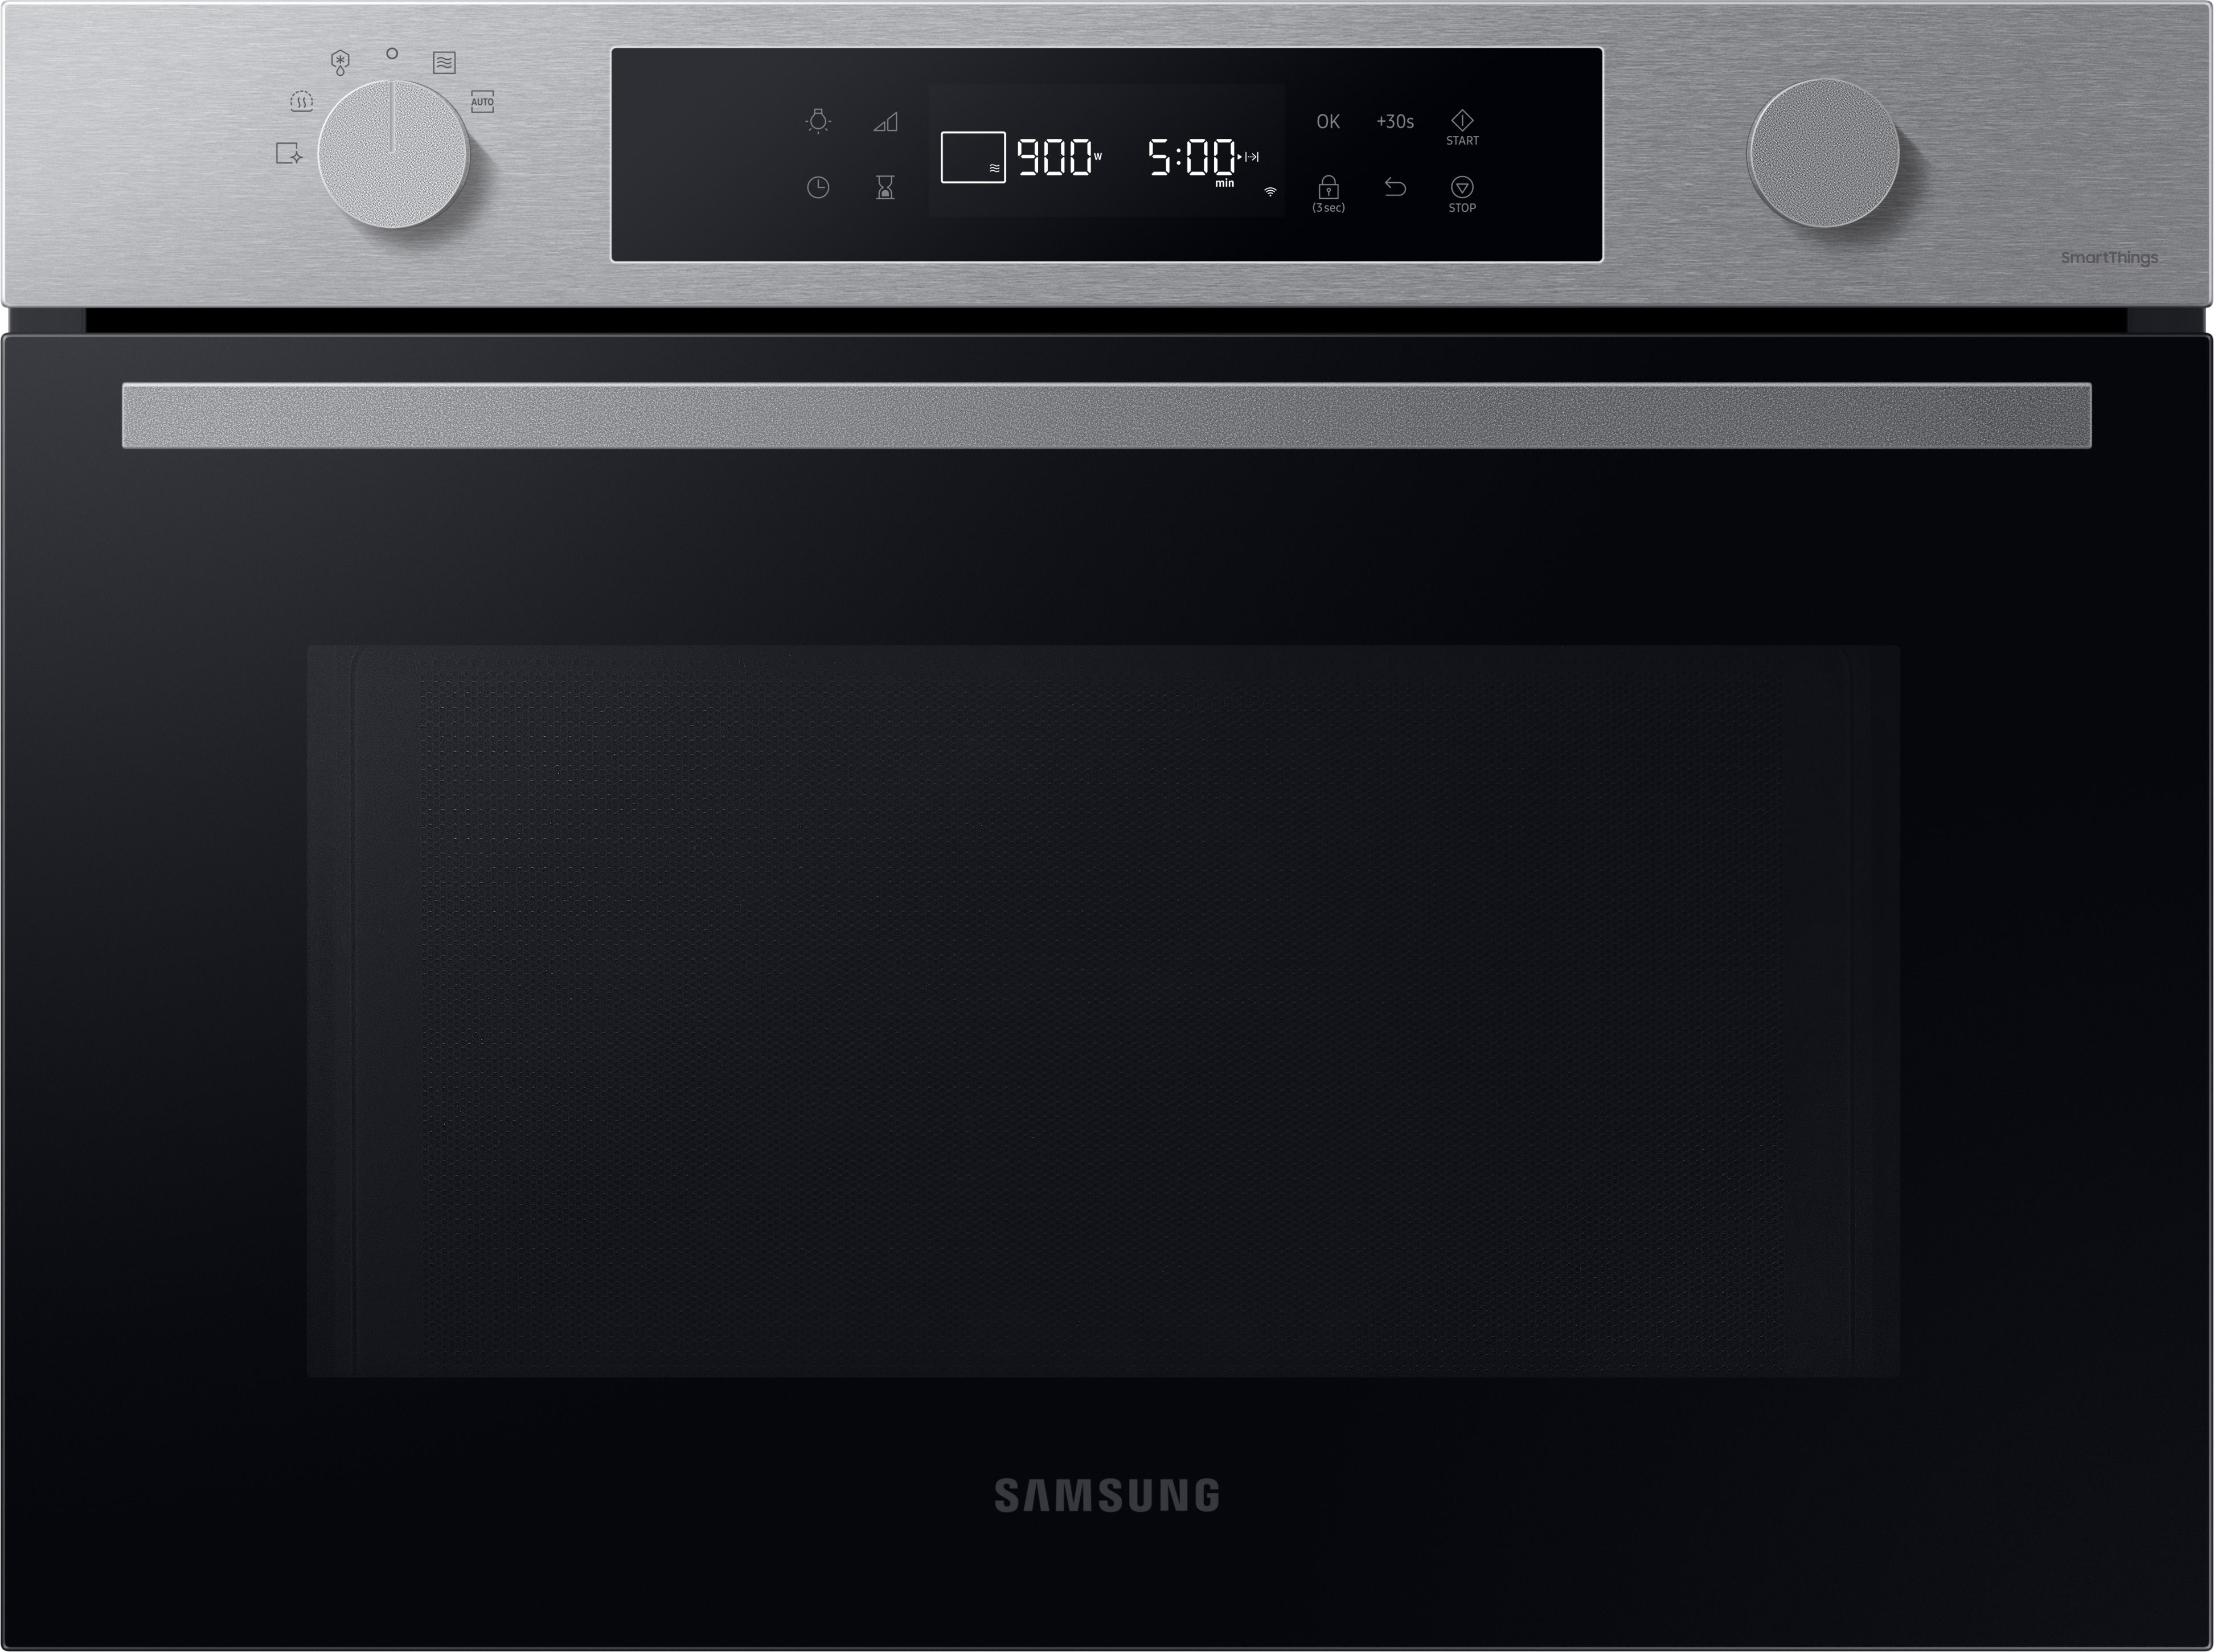 Samsung Series 4 NQ5B4513GBS Wifi Connected Built In Microwave - Stainless Steel, Stainless Steel